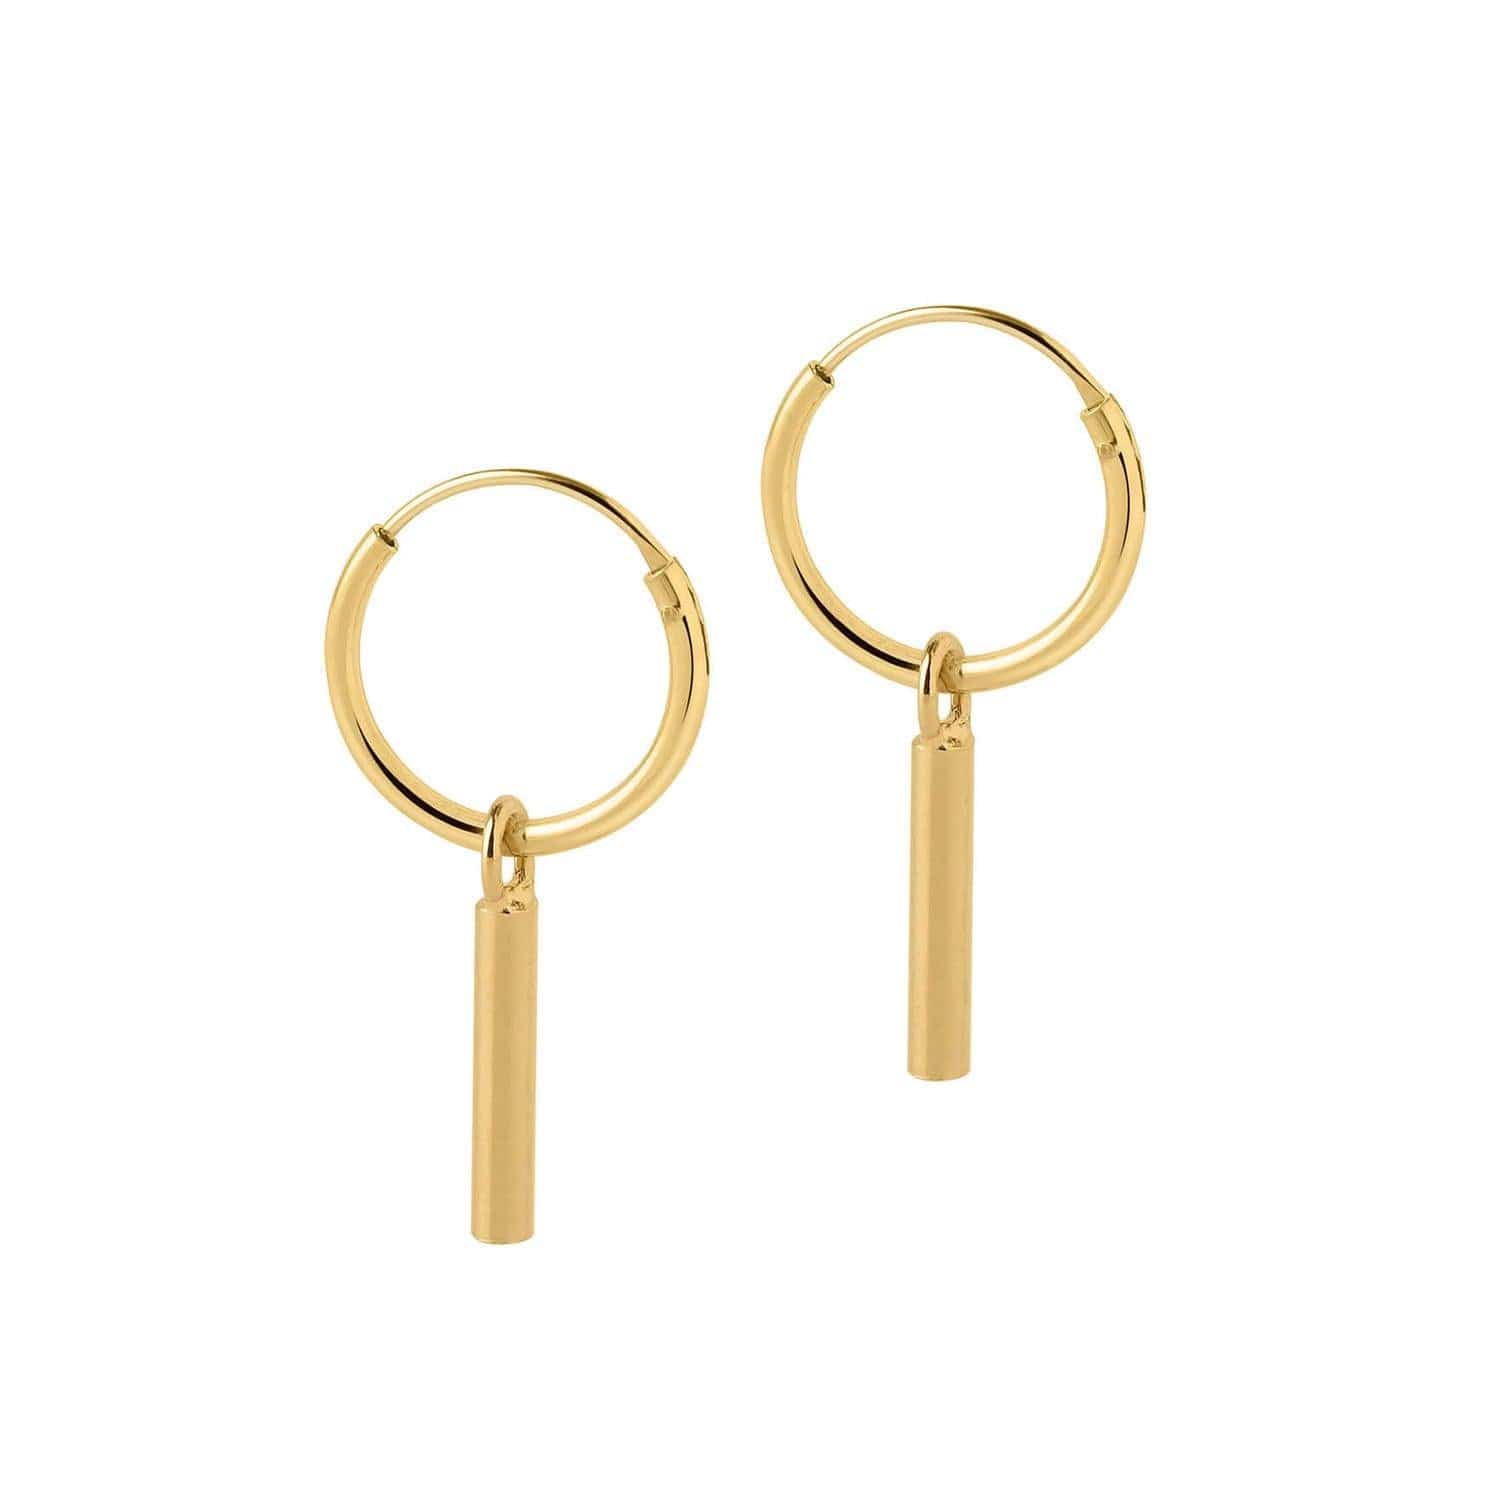 12mm gold plated hoop earrings with long rod